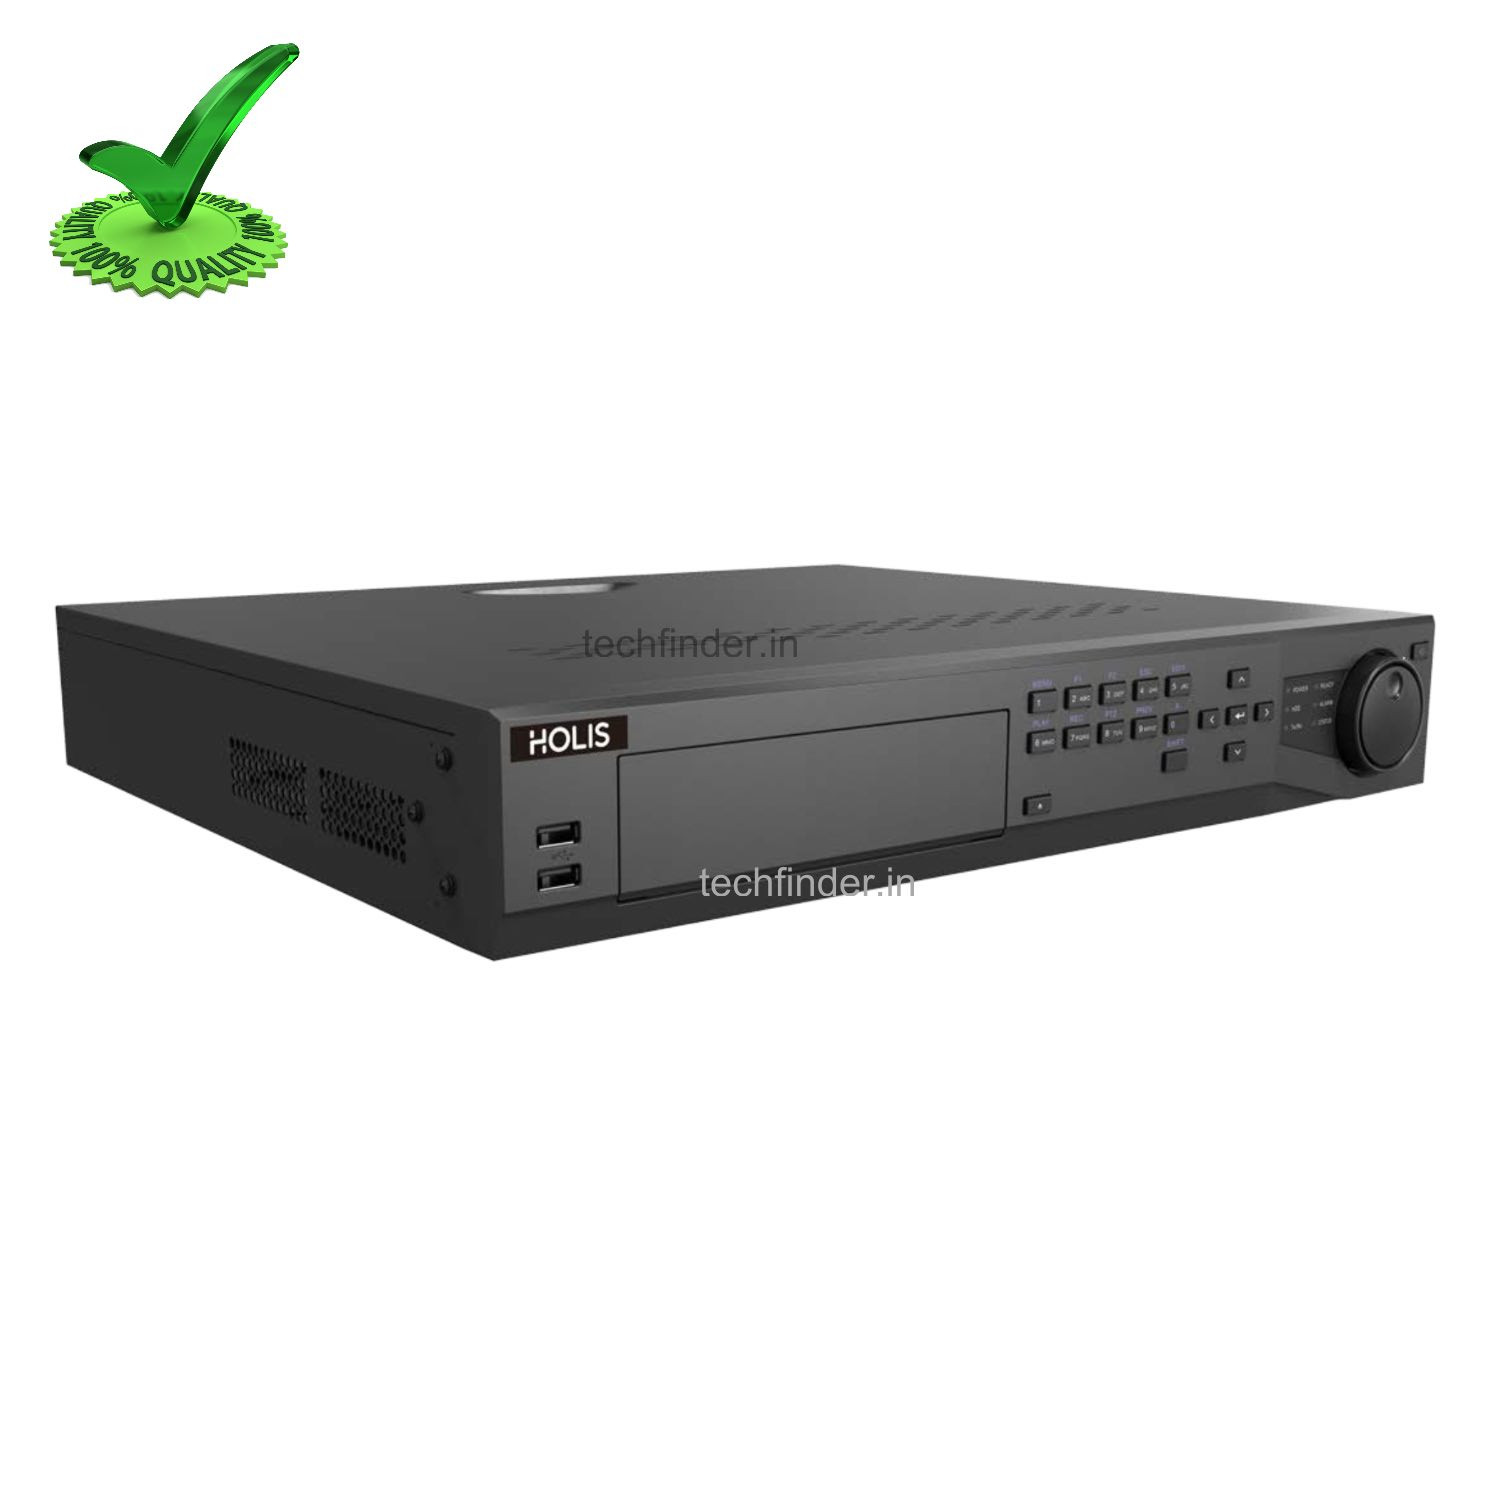 Holis Standard HOLNVR32-IN 32Ch NVR from Tyco